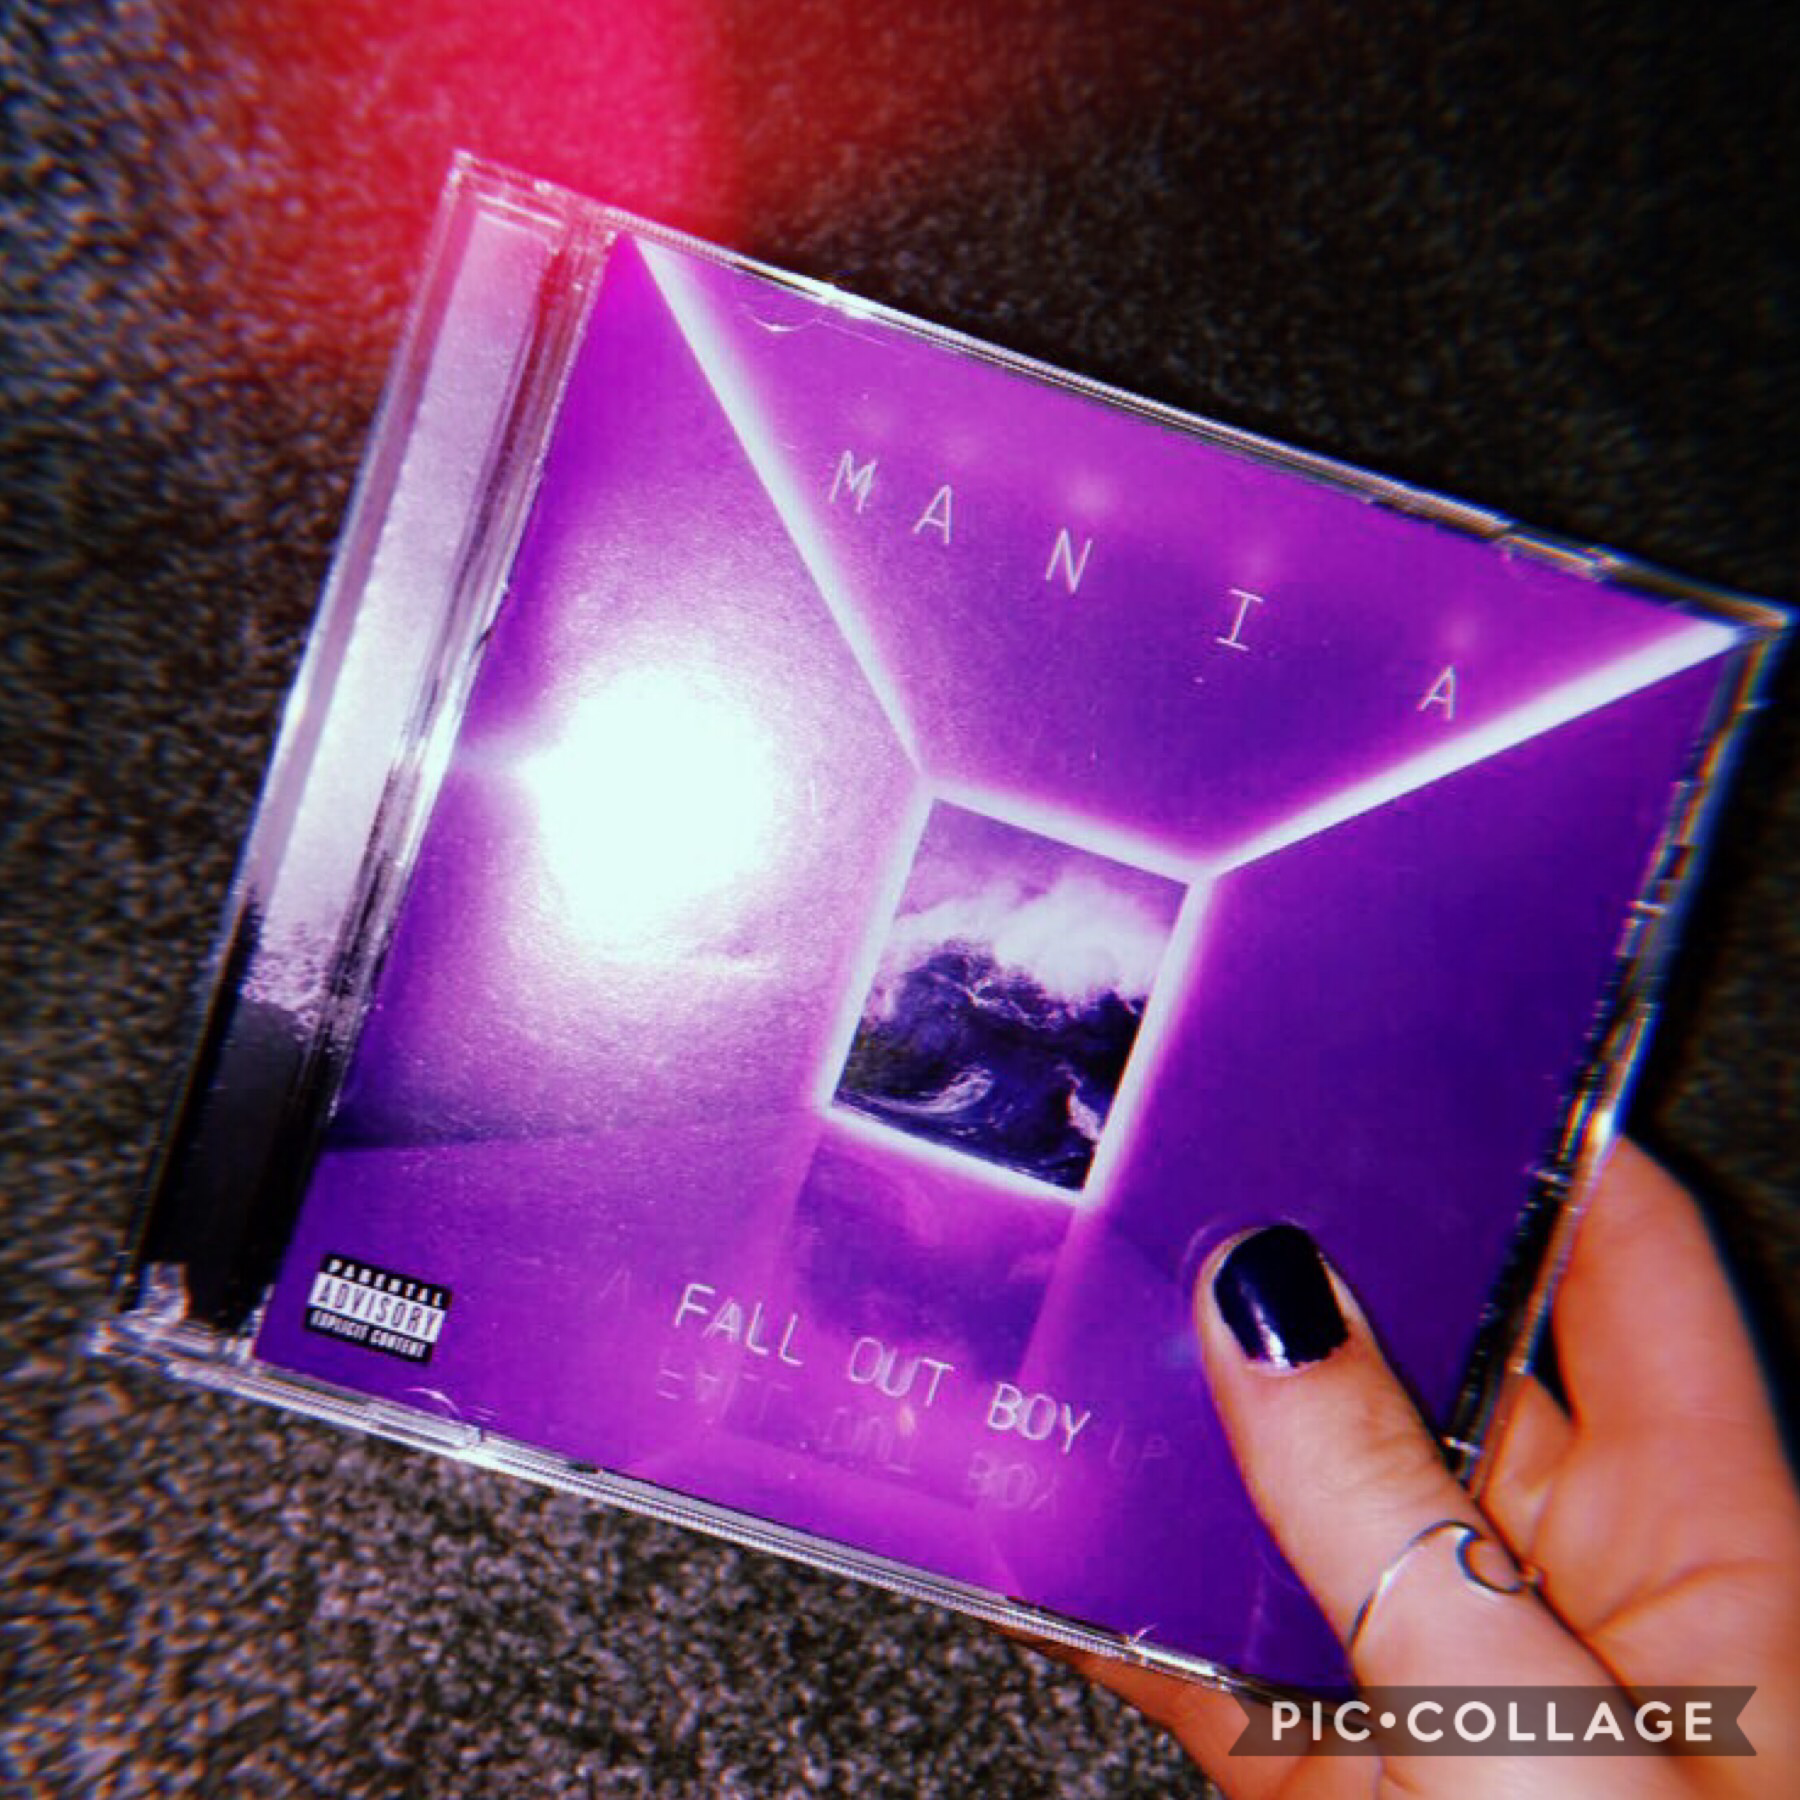 I can’t believe it’s been a whole year since this album came out :,))